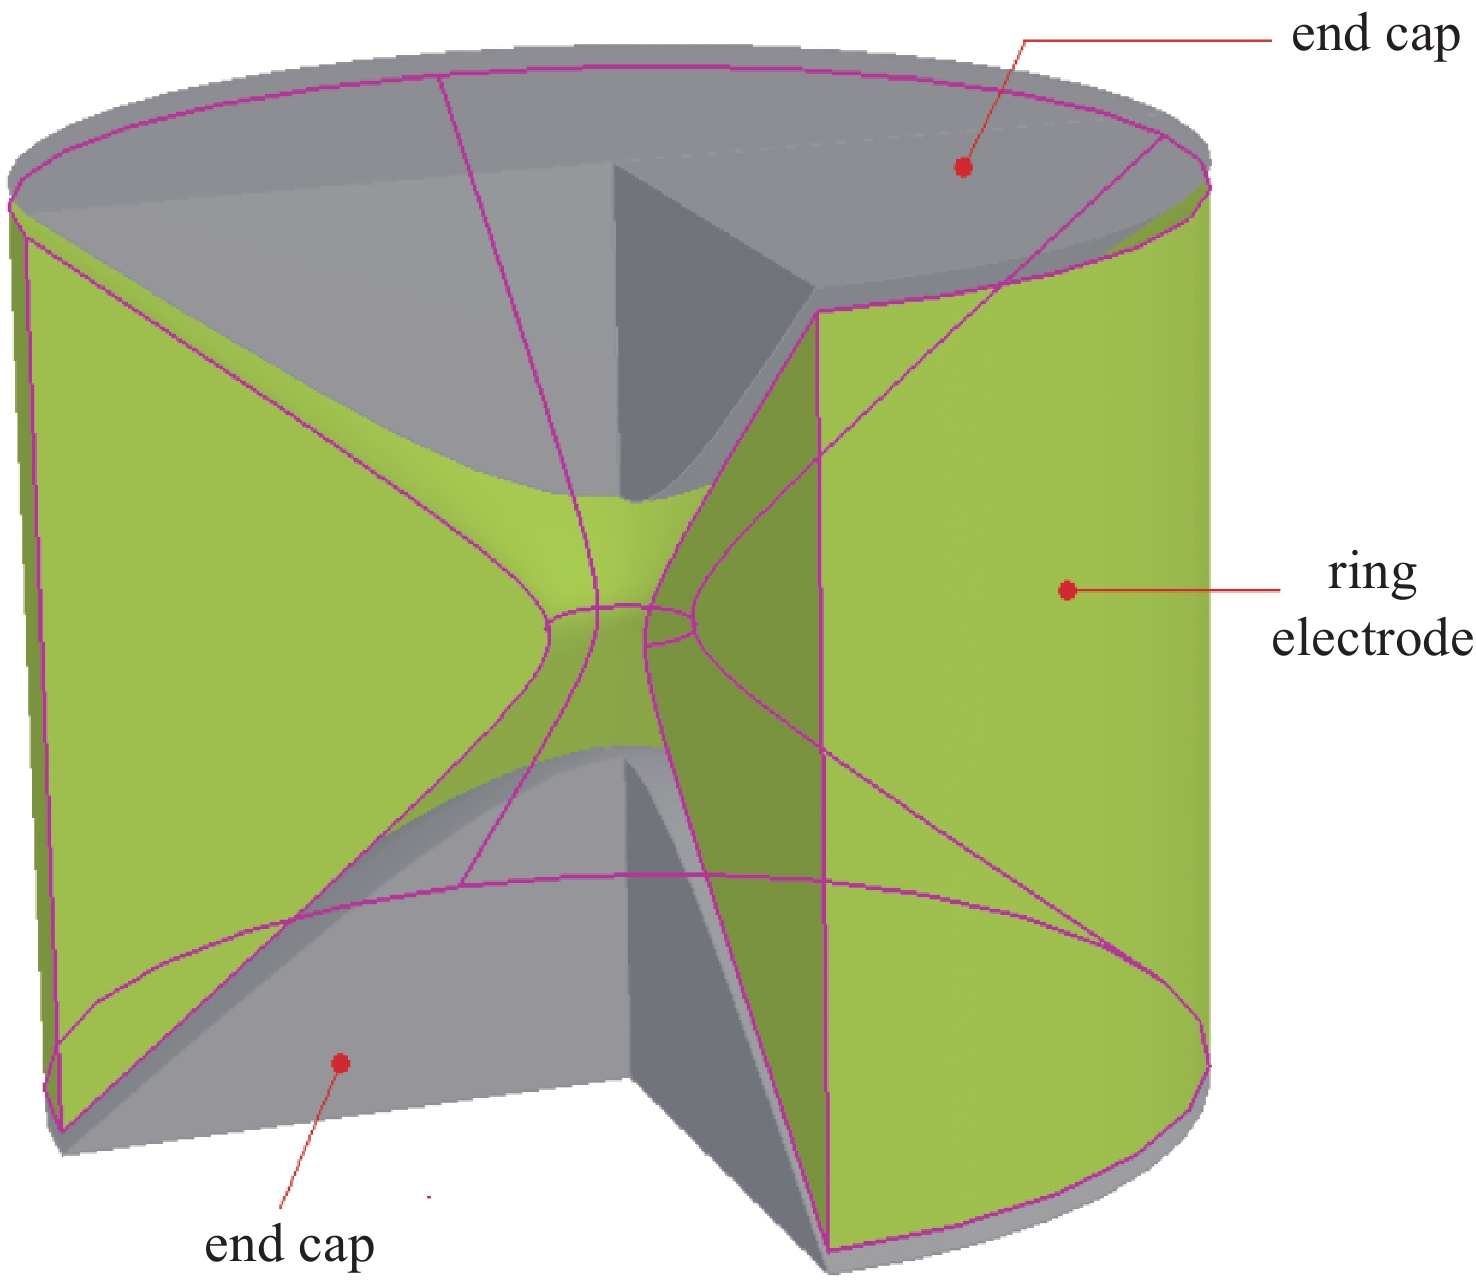 Geometry model of a Penning trap in ANSYS